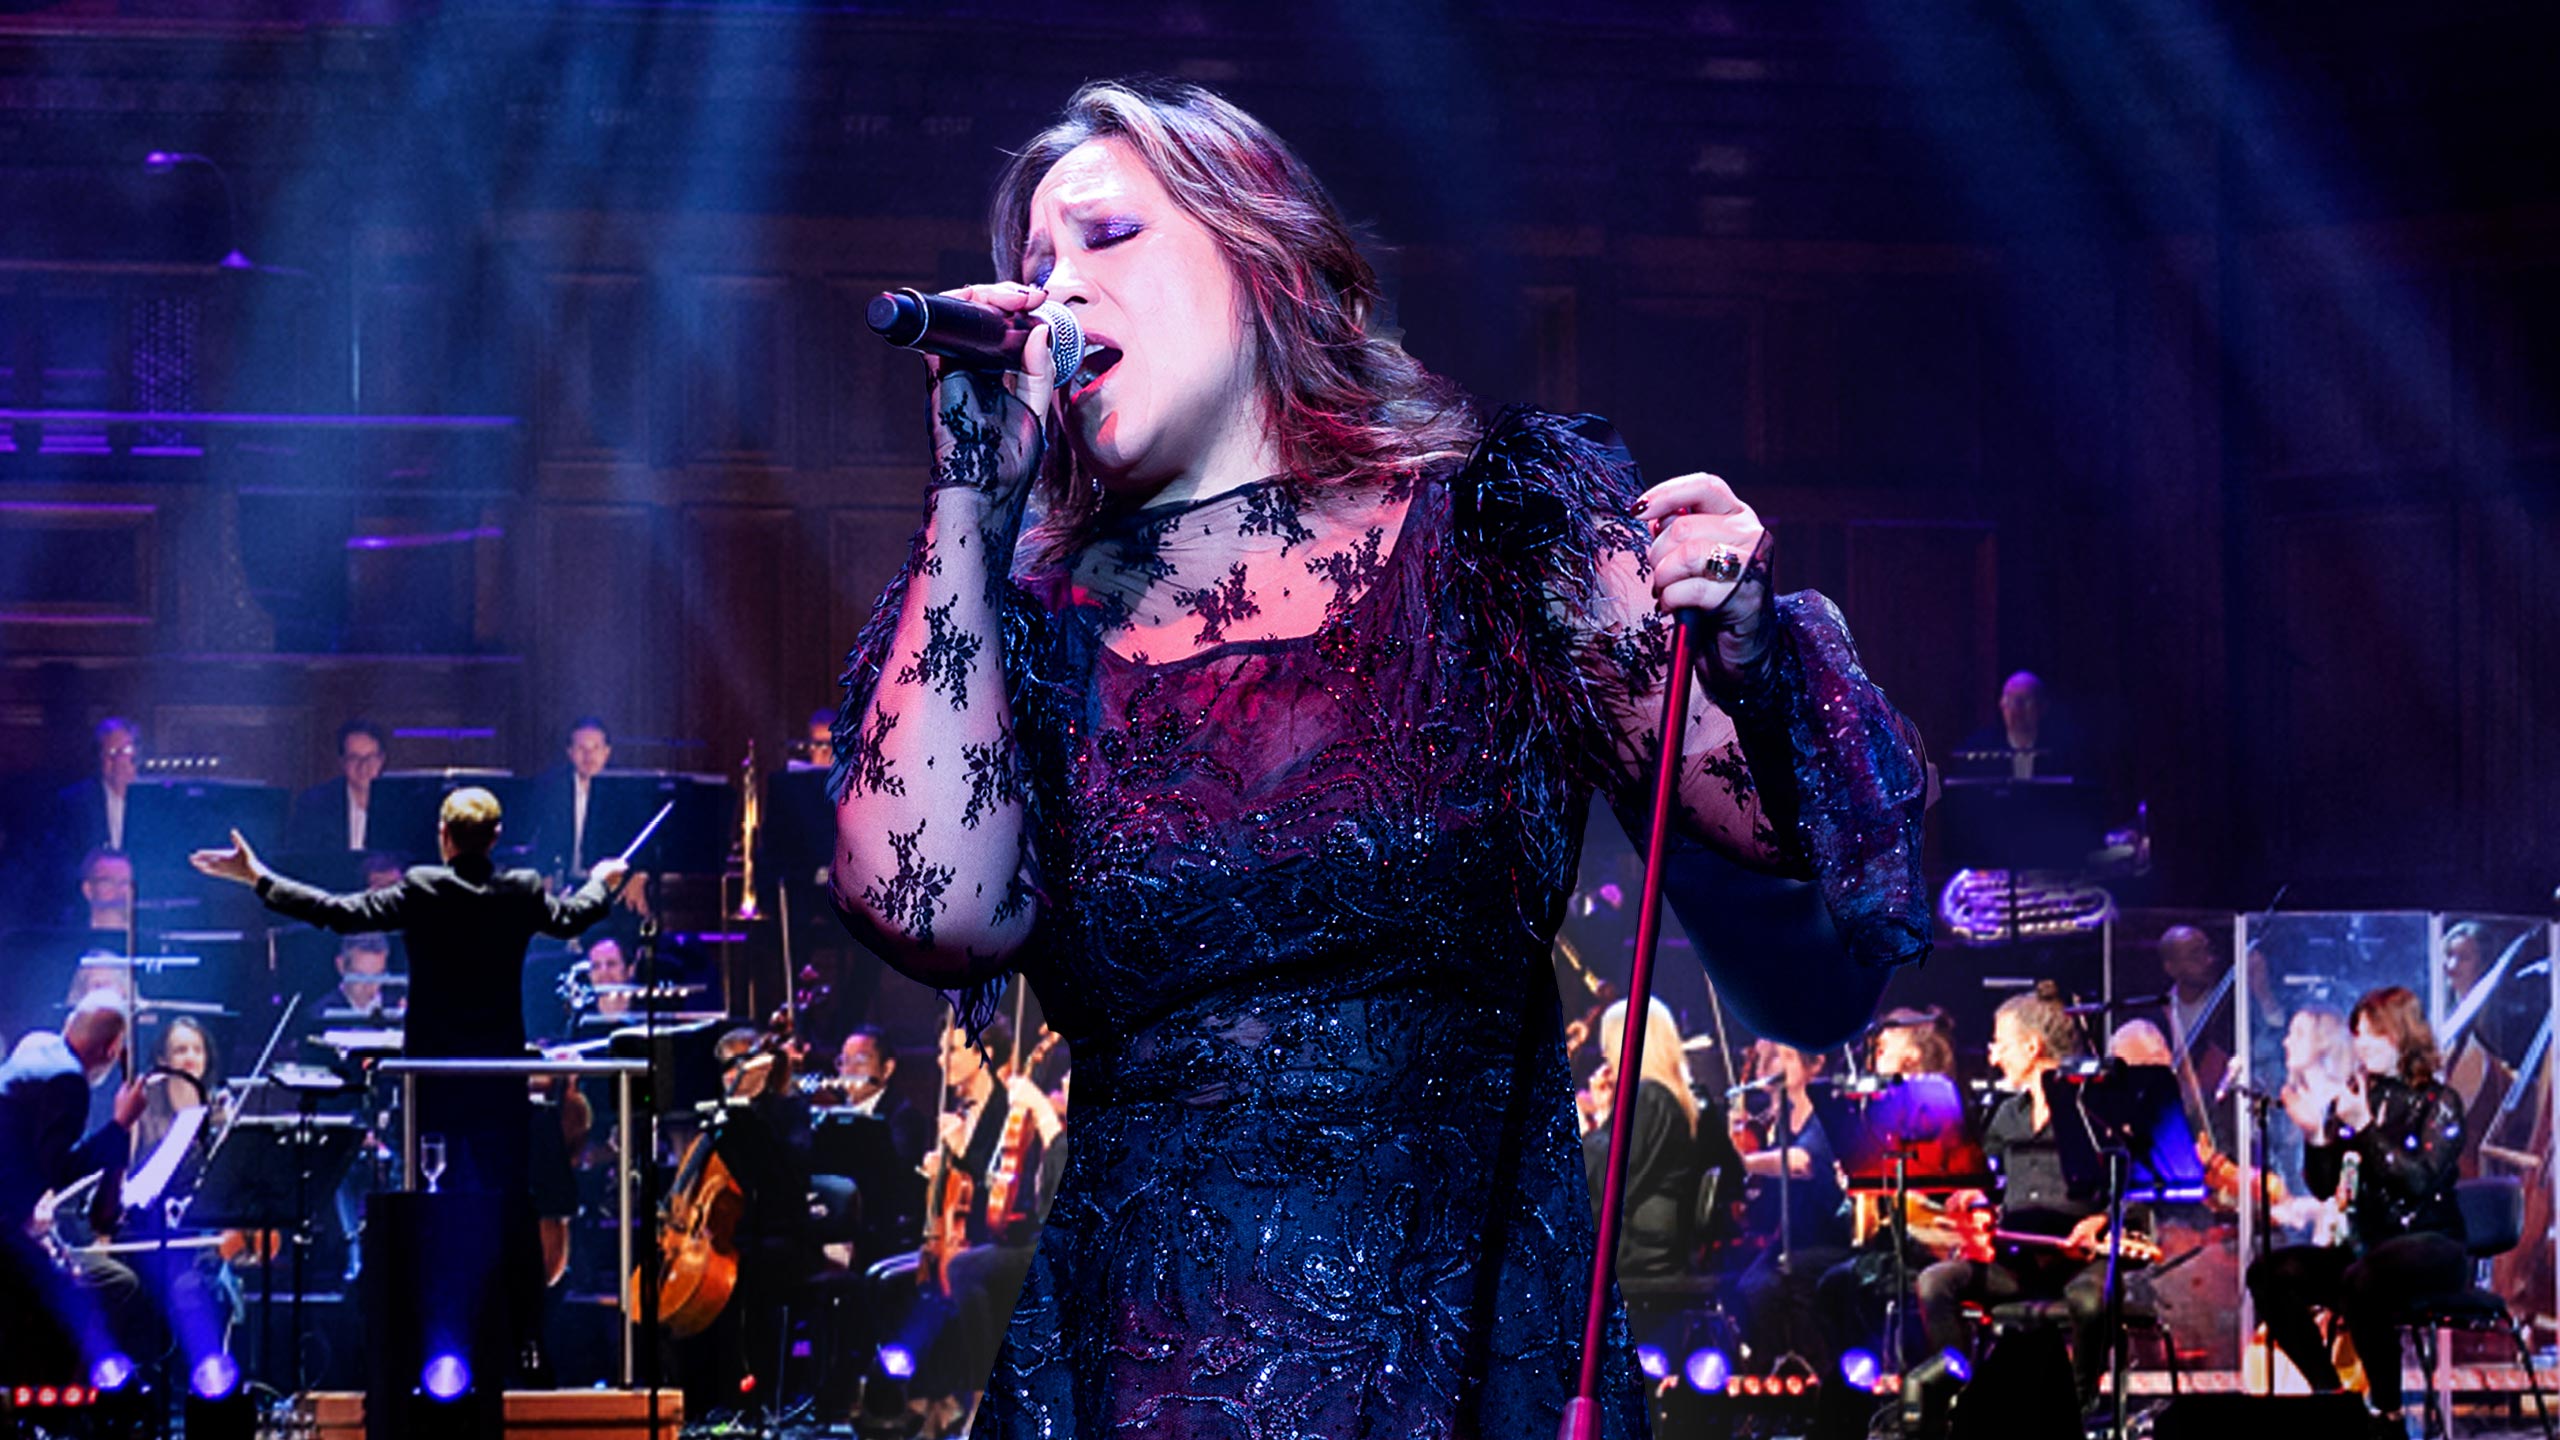 A Filipino-Australian woman with brown layered, shoulder-length hair holds a microphone in her right hand and the microphone stand in her left hand. She's singing on stage in front of an orchestra.